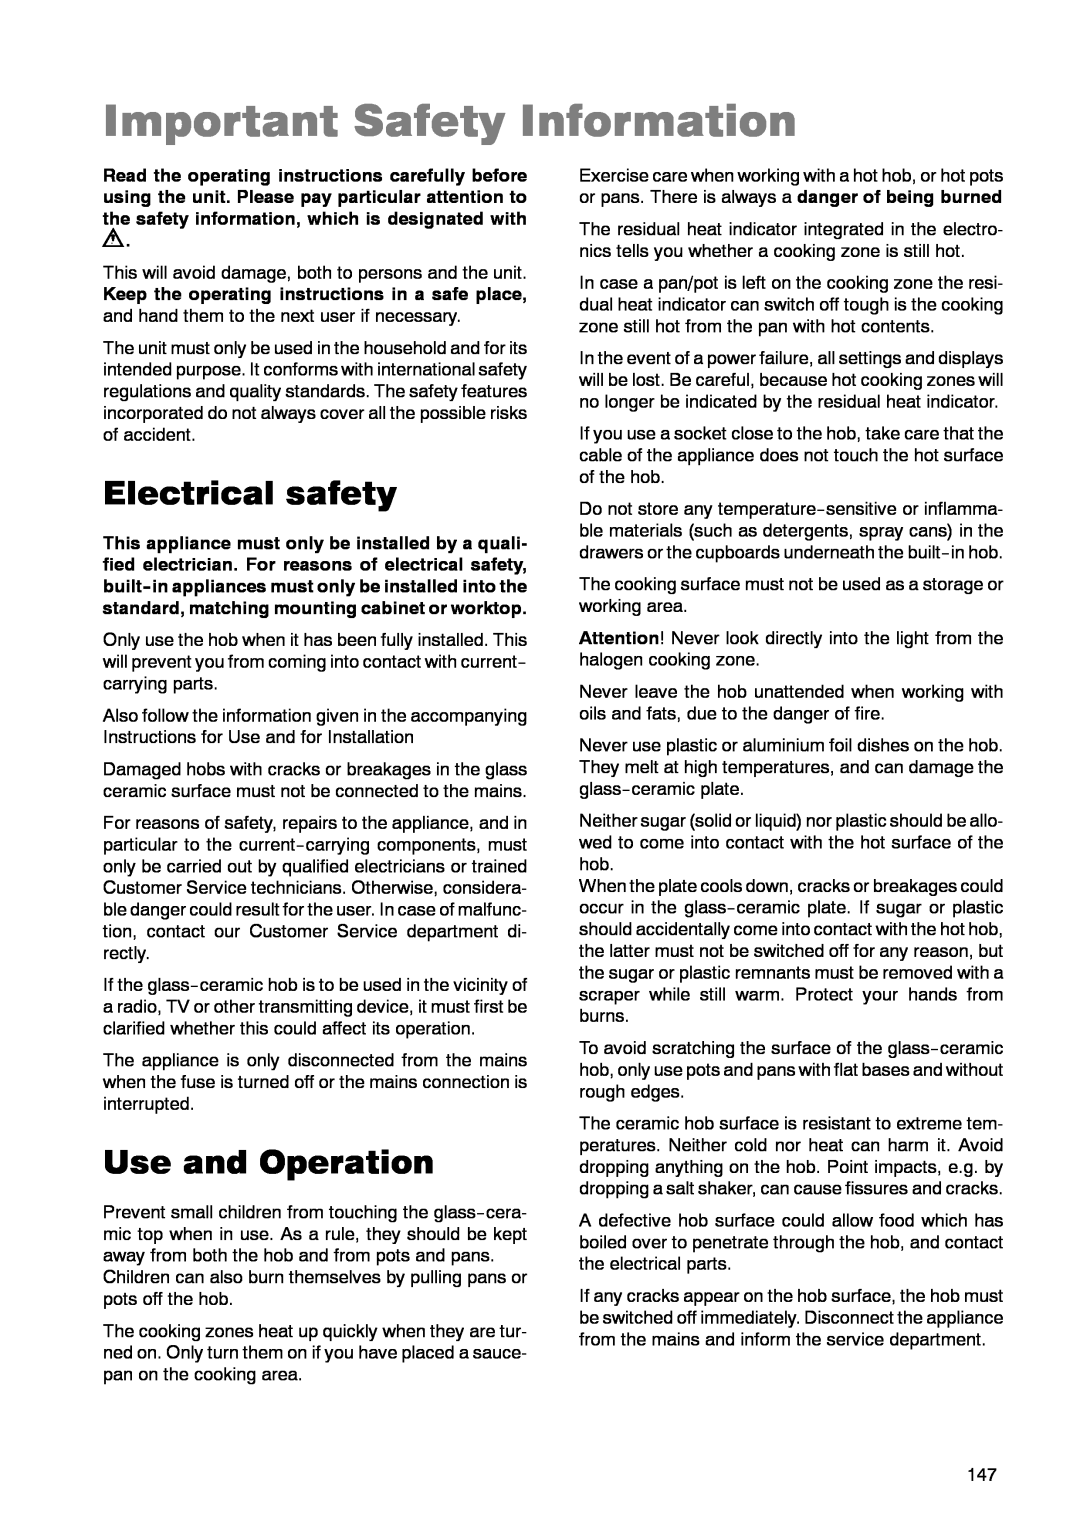 Zanussi ZKT 662 LN operating instructions Important Safety Information, Electrical safety, Use and Operation 